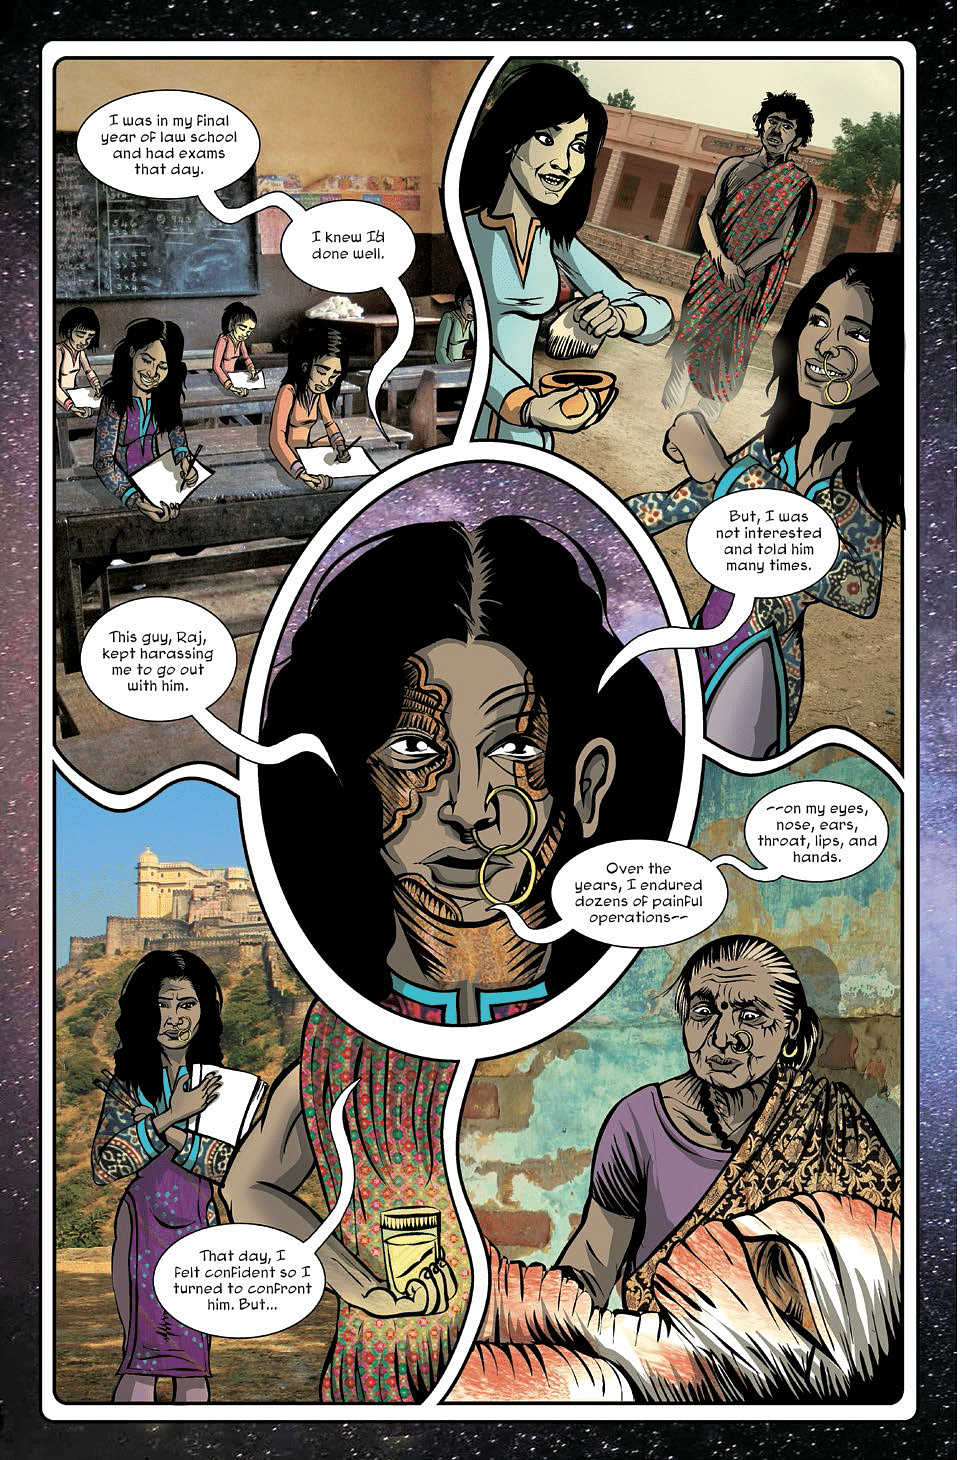 She is back to free acid attack survivors from fear in her new comic ‘Priya’s Mirror.’